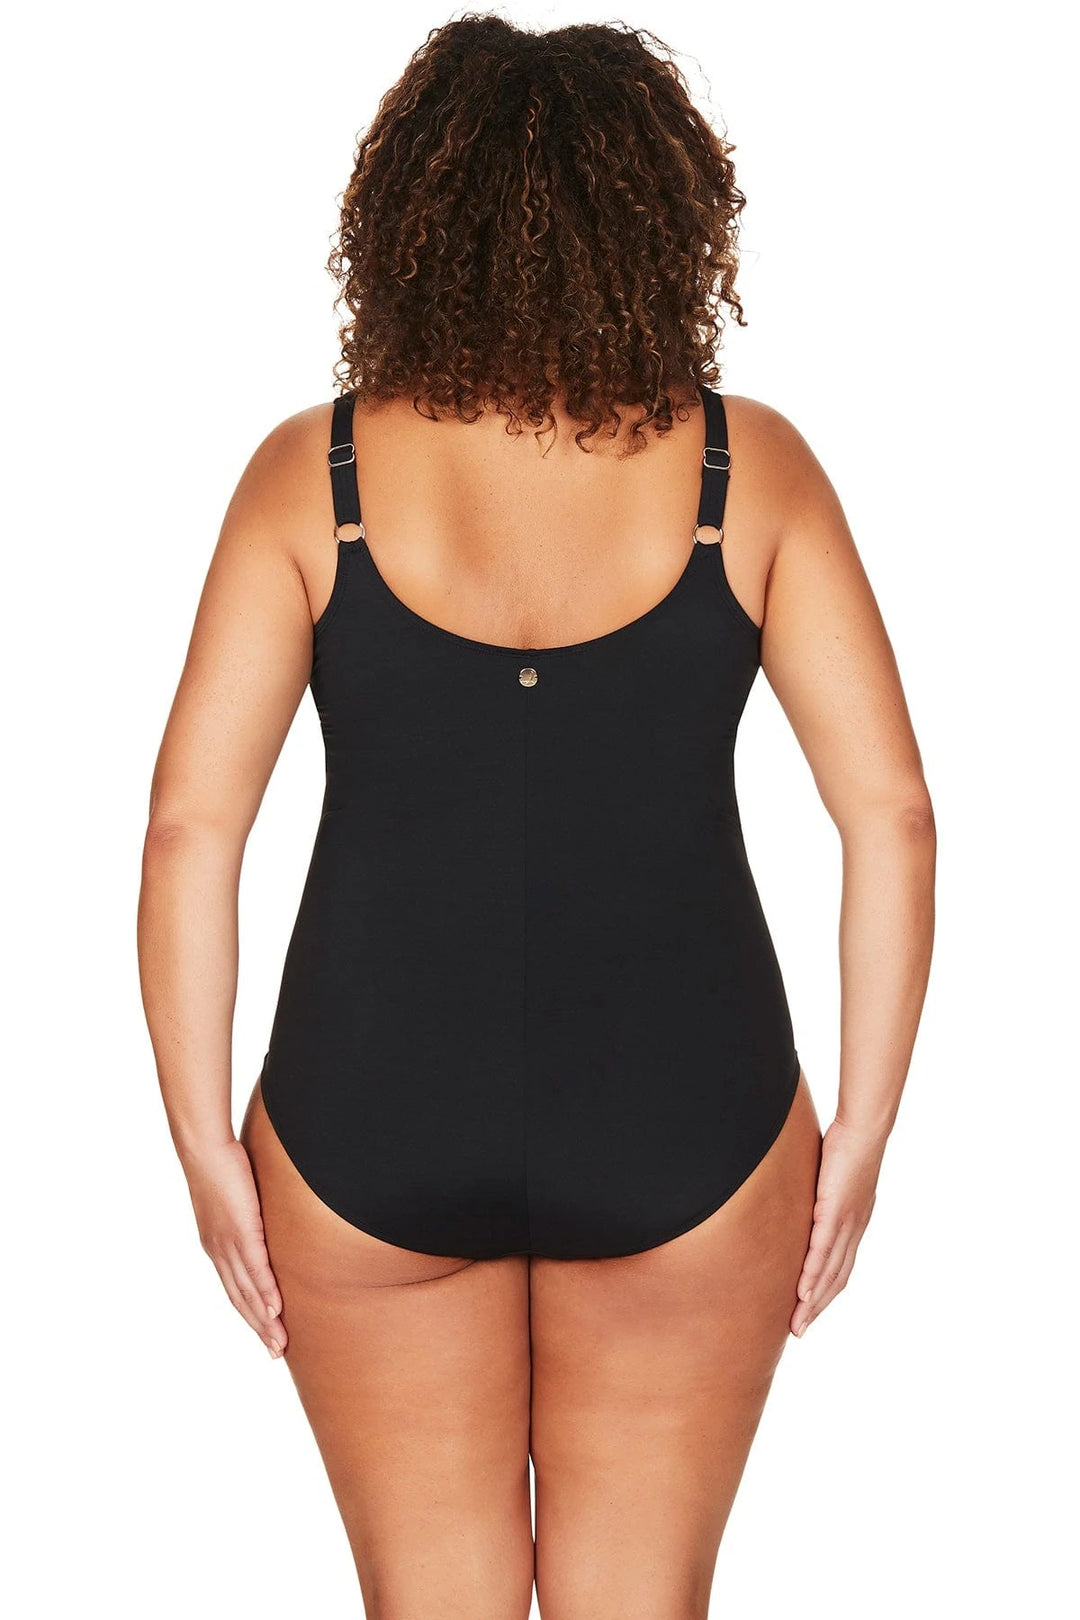 Recycled Hues Black Delacroix One Piece